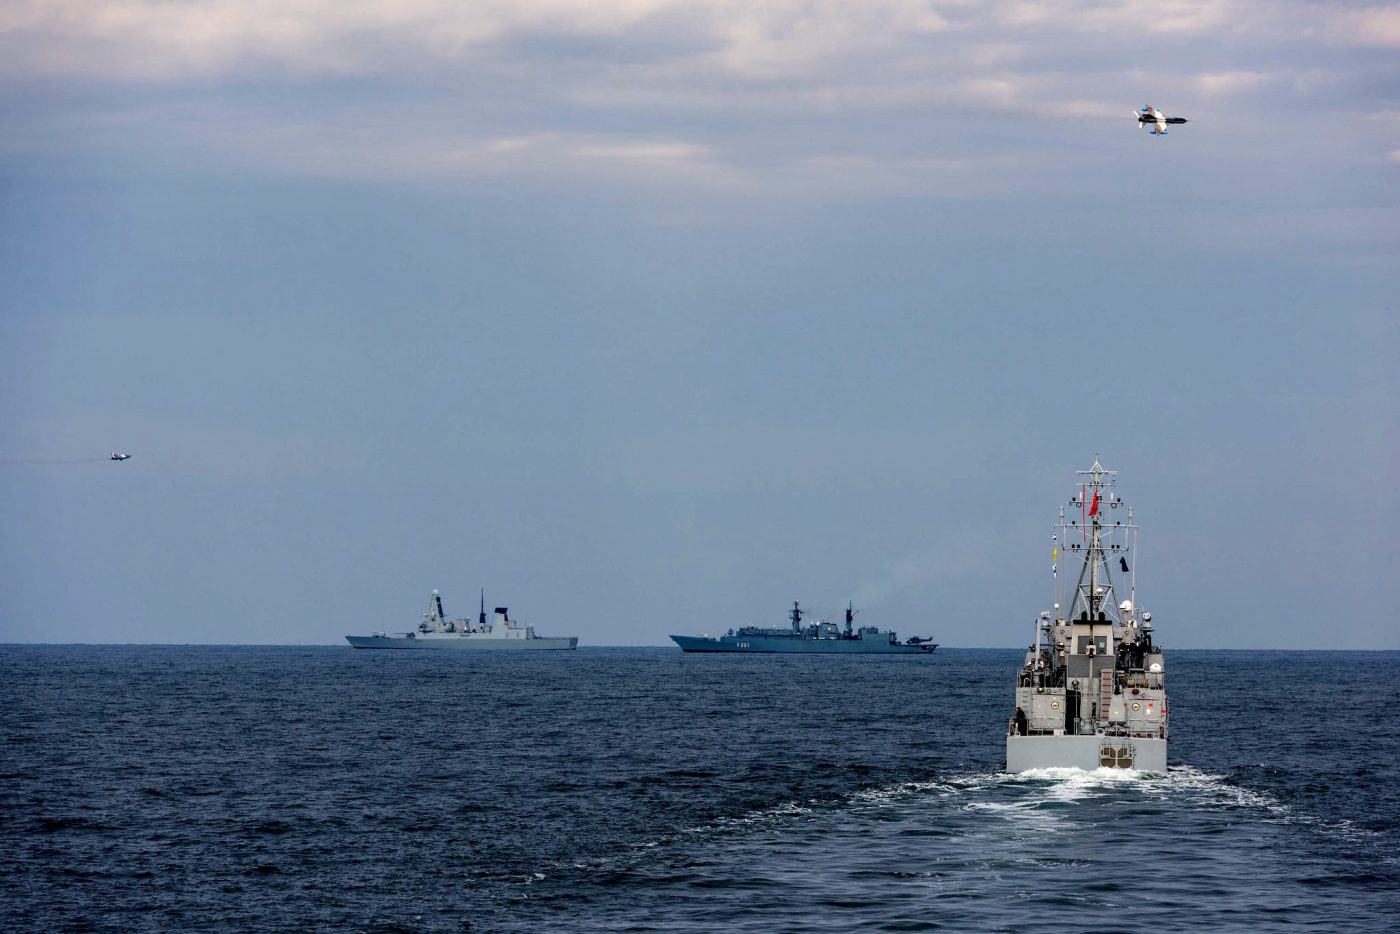 Photo: “SNMG2 and SNMCMG2 sailing in the Black Sea as part of NATO routine presence” by NATO under CC BY-NC-ND 2.0.